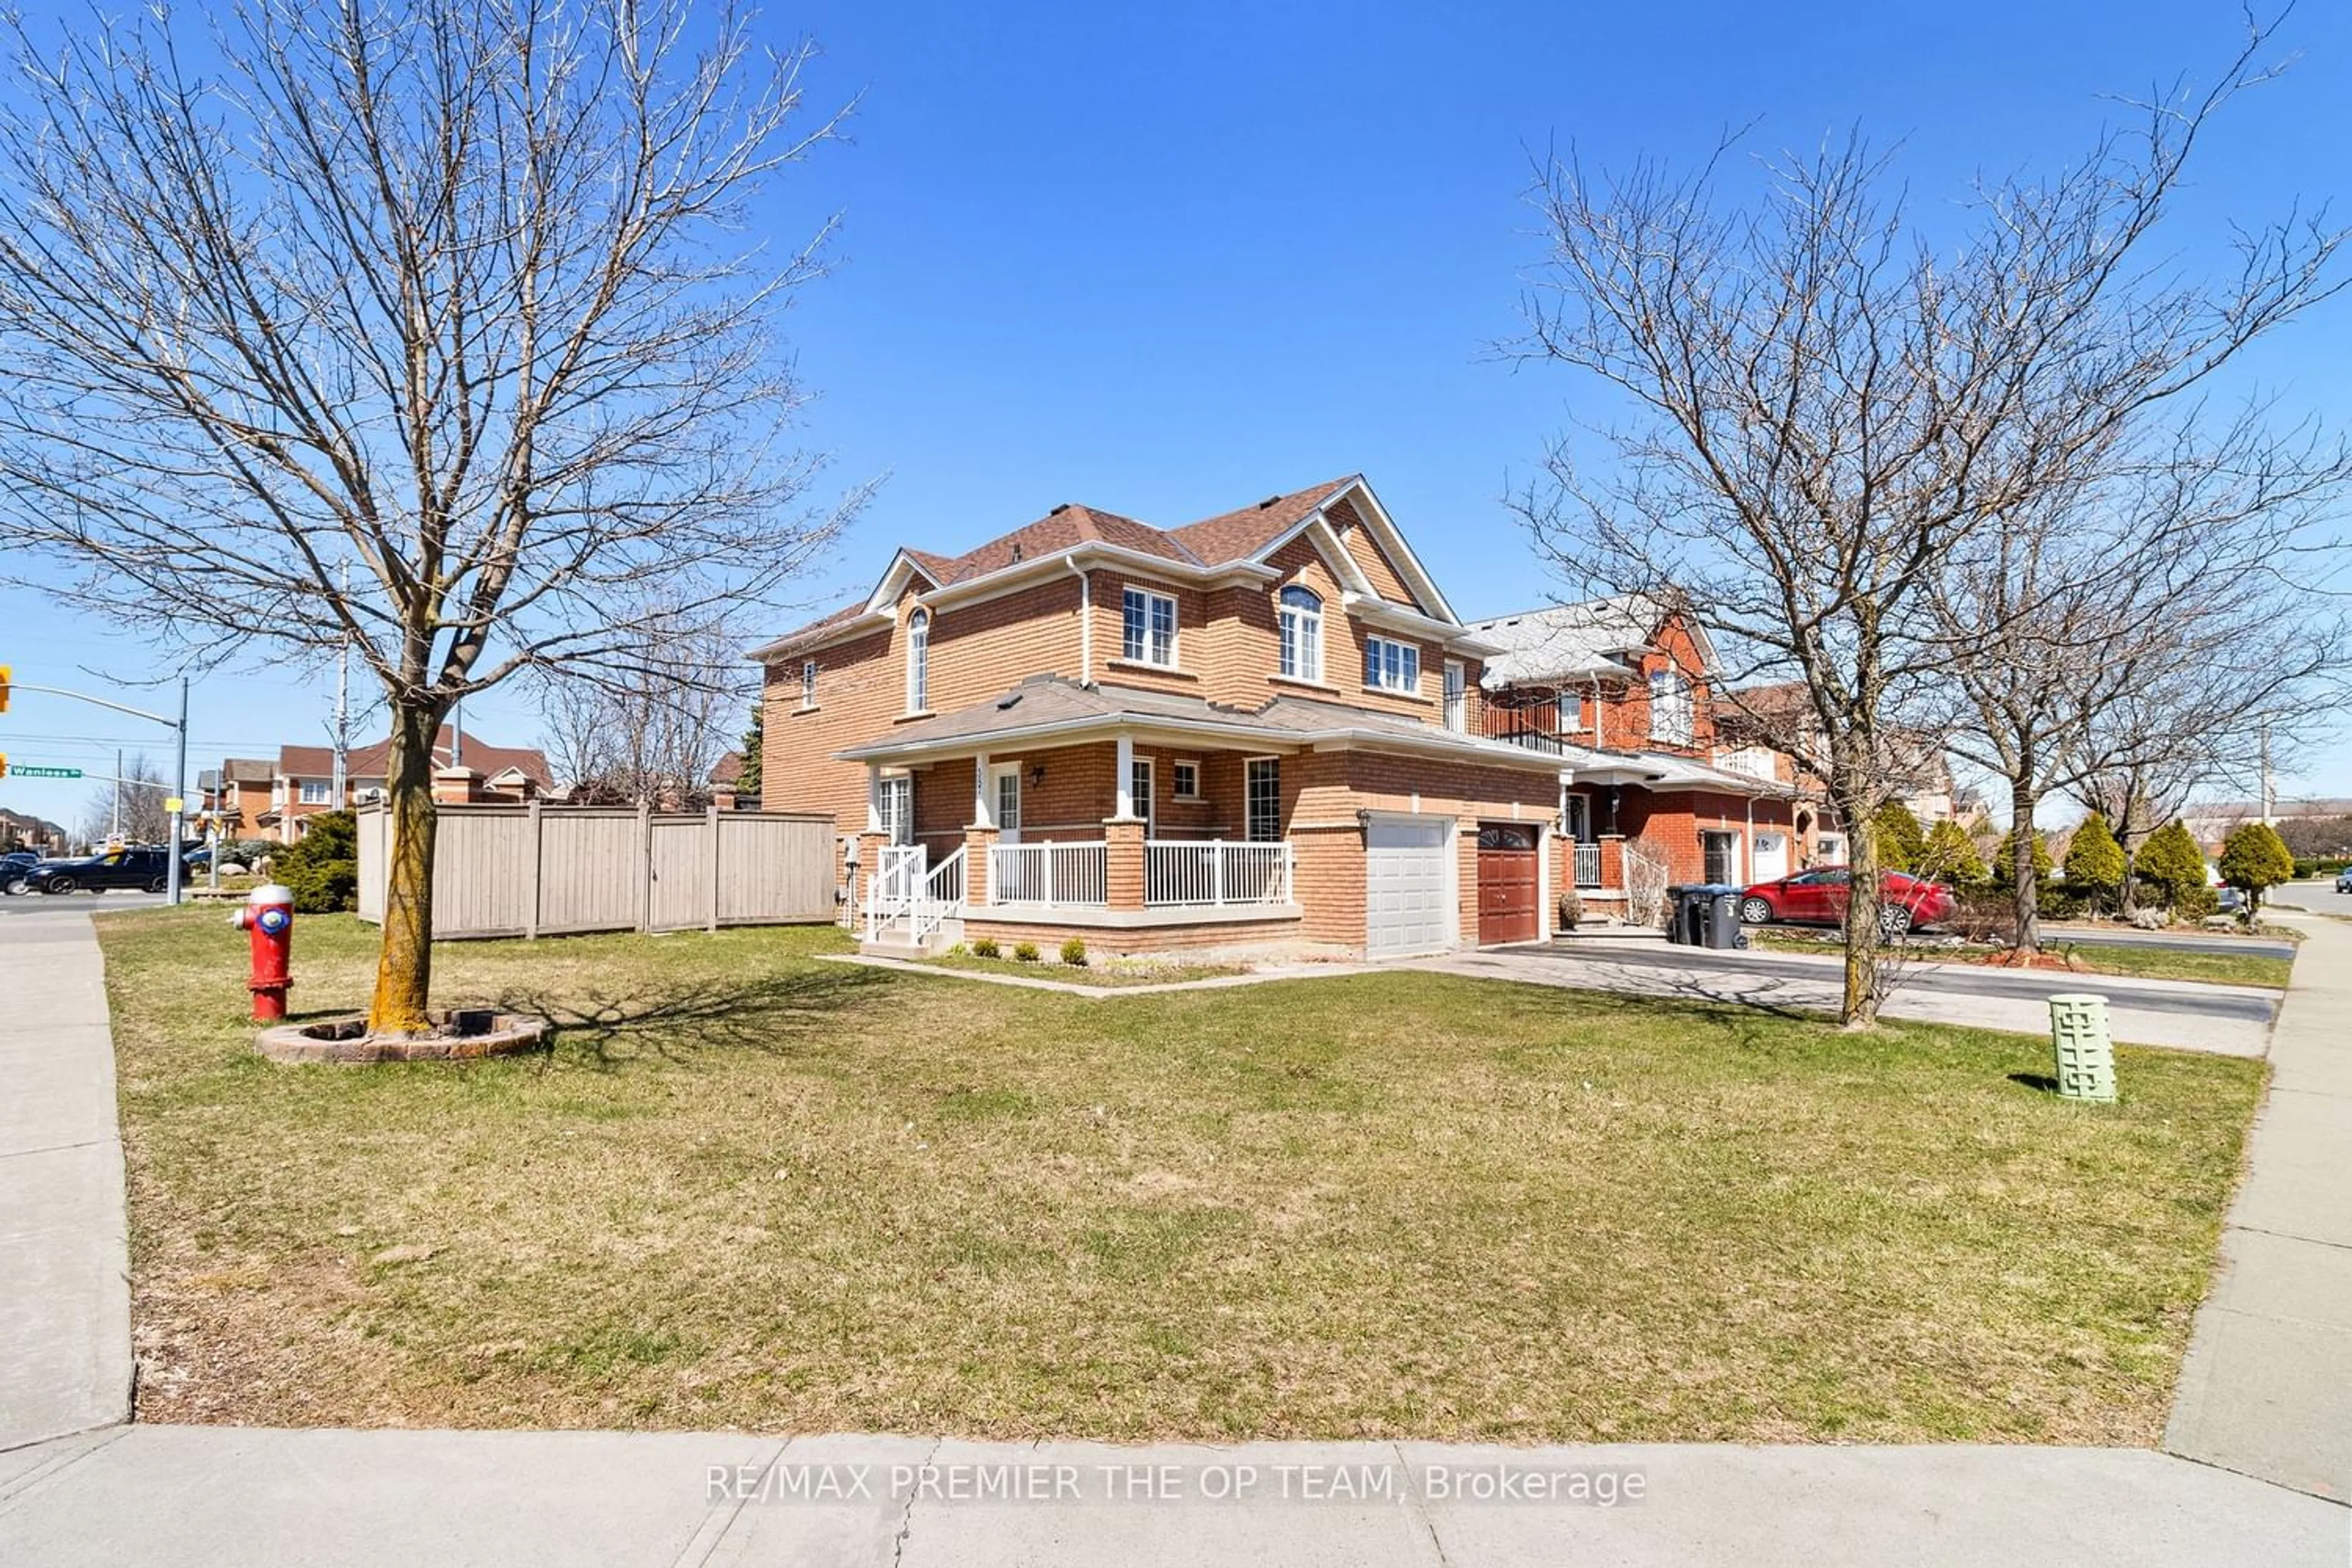 Frontside or backside of a home for 387 Van Kirk Dr, Brampton Ontario L7A 1T2